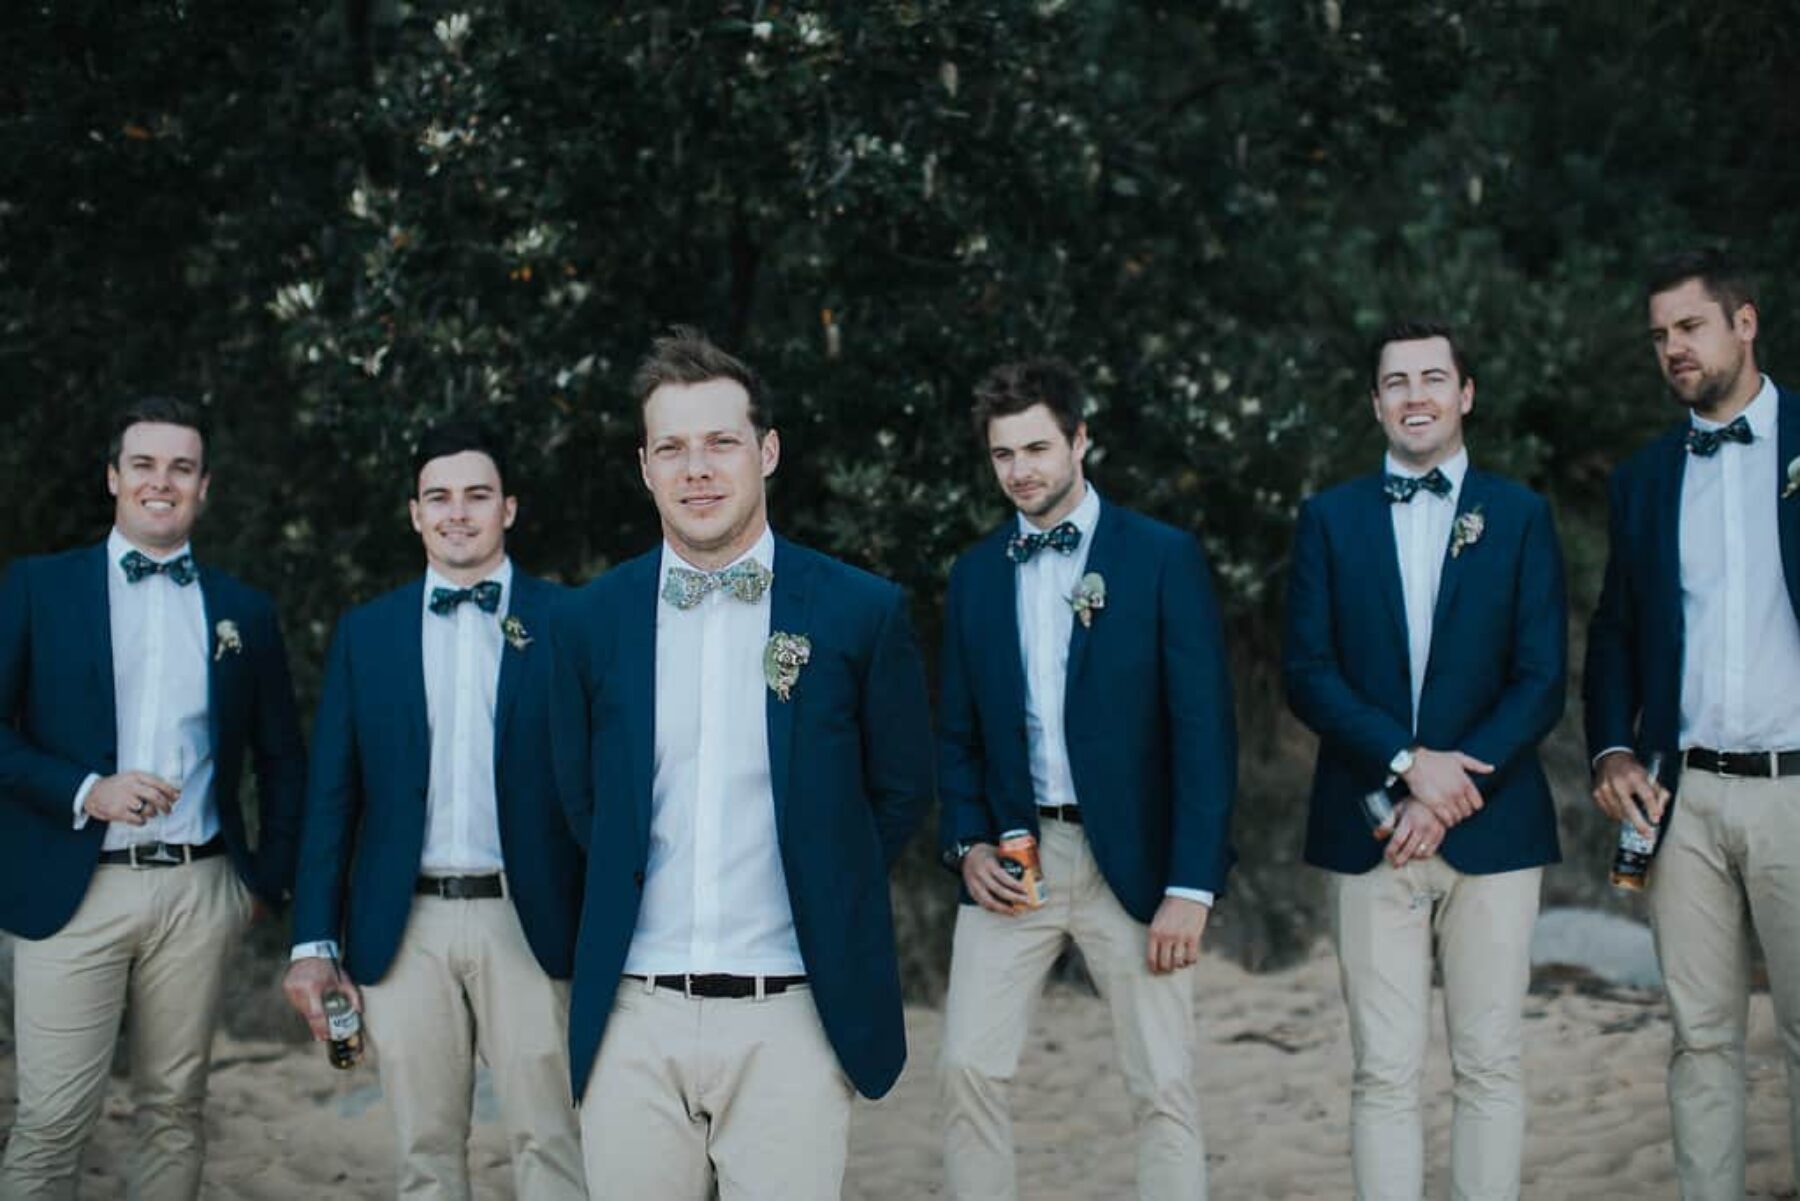 casual groomsmen in chinos and navy blazers